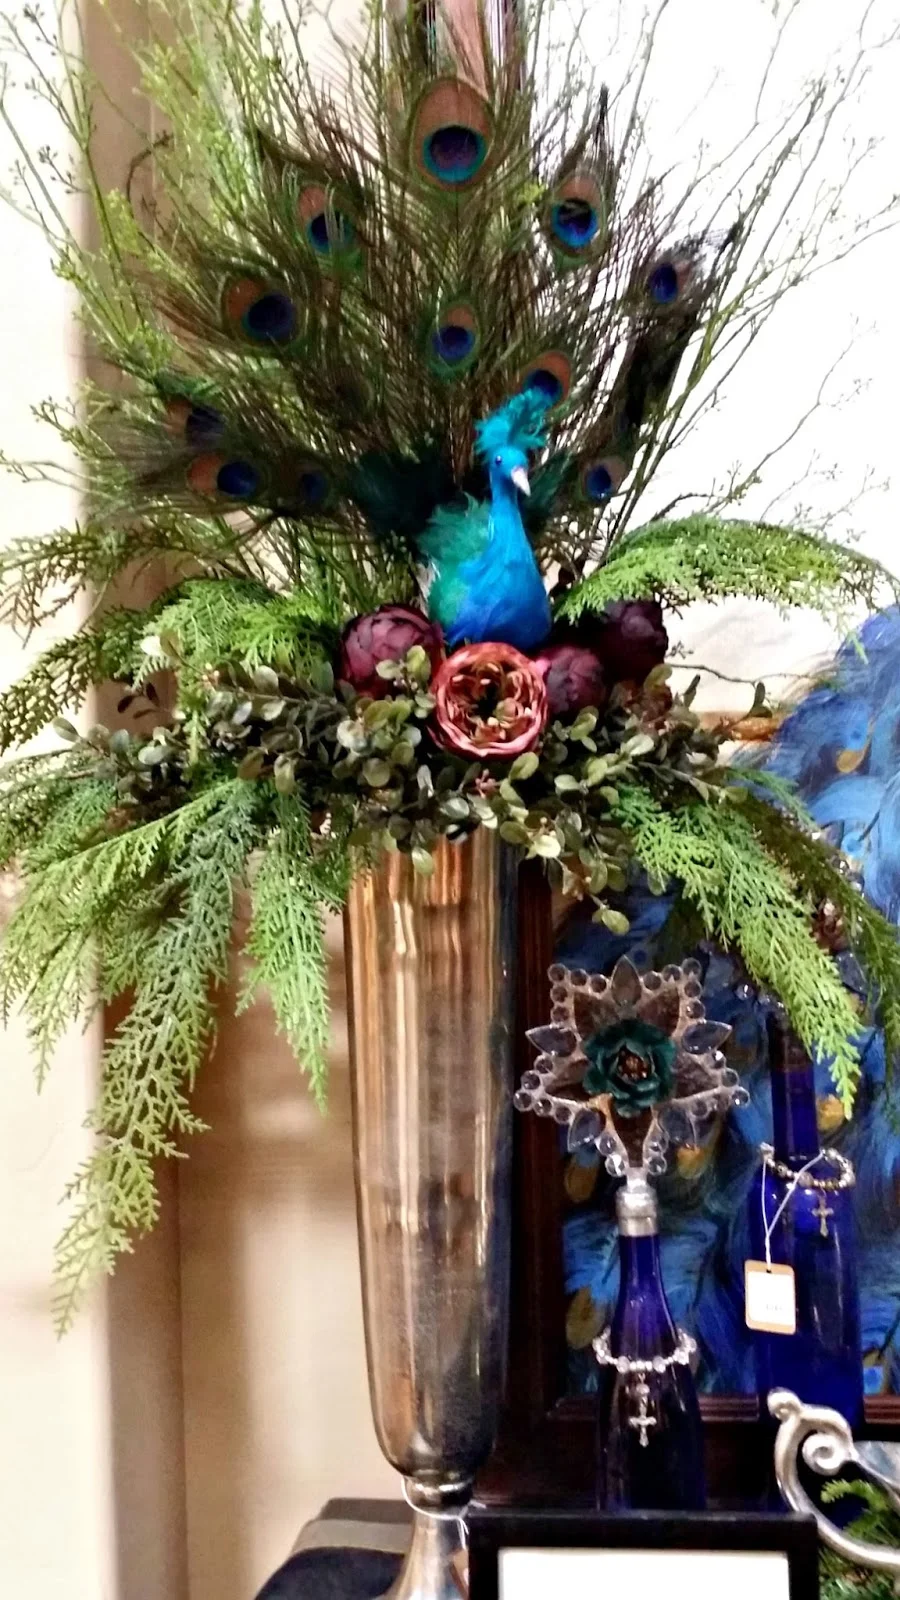 Decorating a floral with peacocks